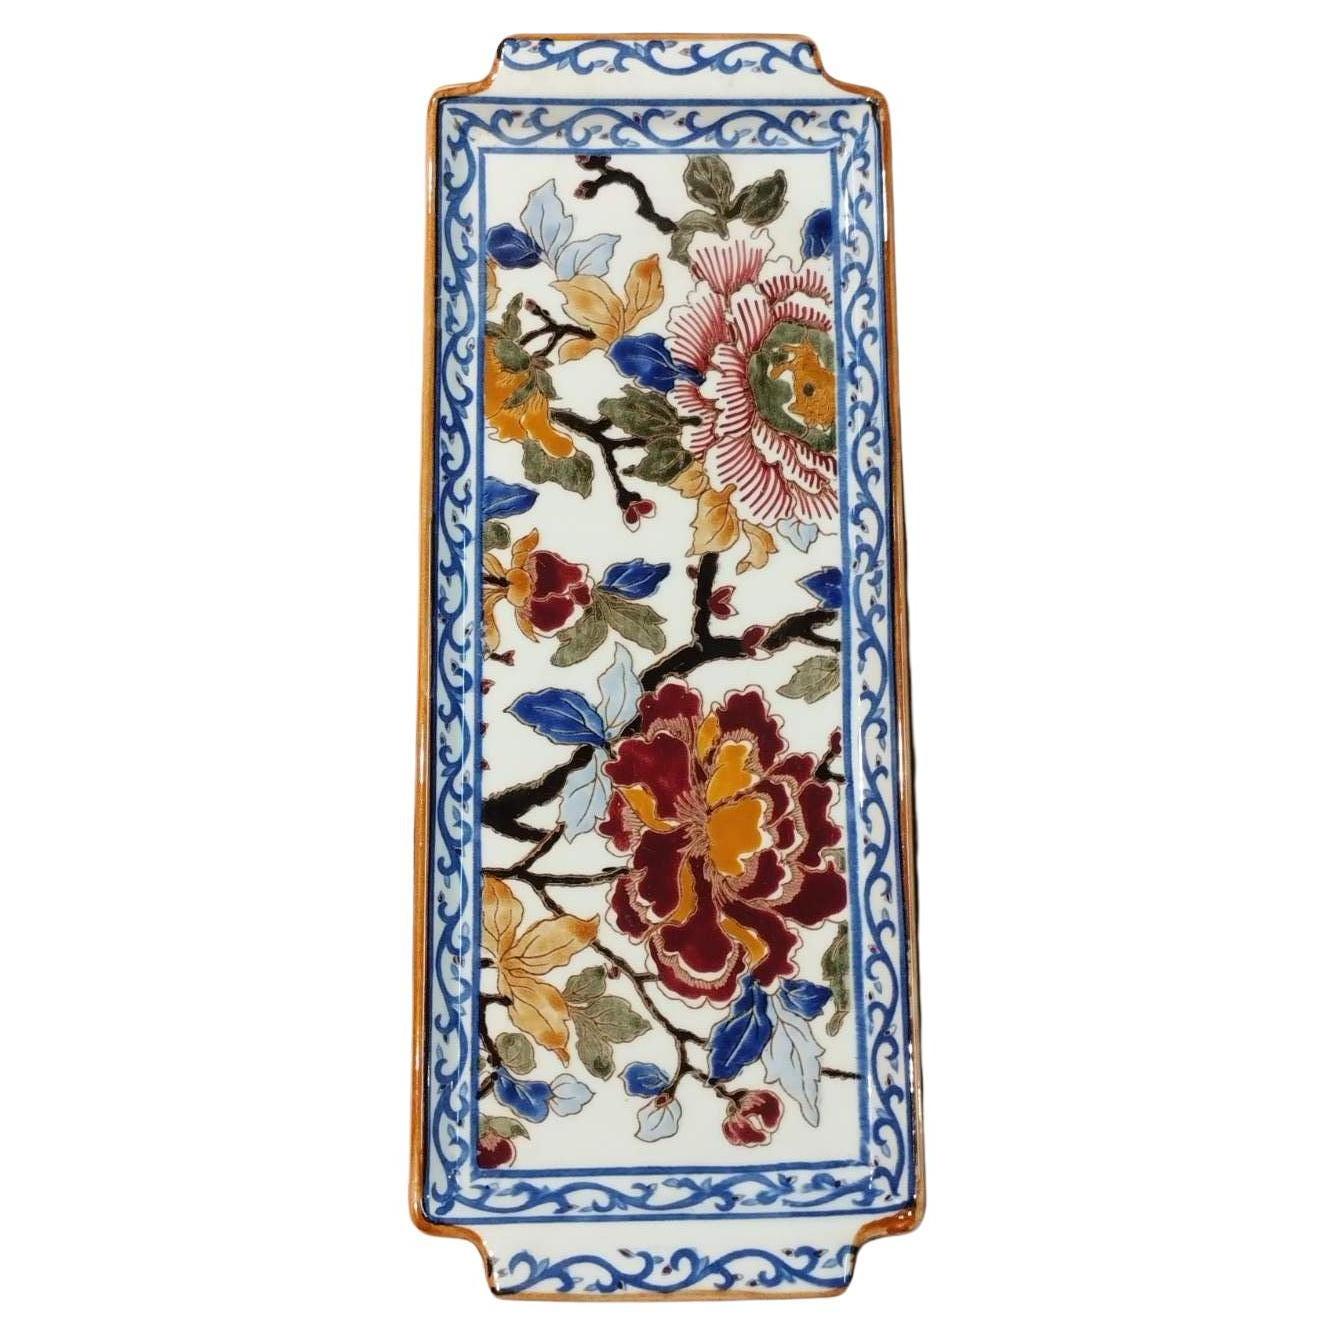 French original and colourful centrepiece by Gien! Made with vivid colours decorated with lovely flowers and surrounded with traditional figures in blue and white. Could bring lots of joy to your table and may be arranged with fruits or candies!